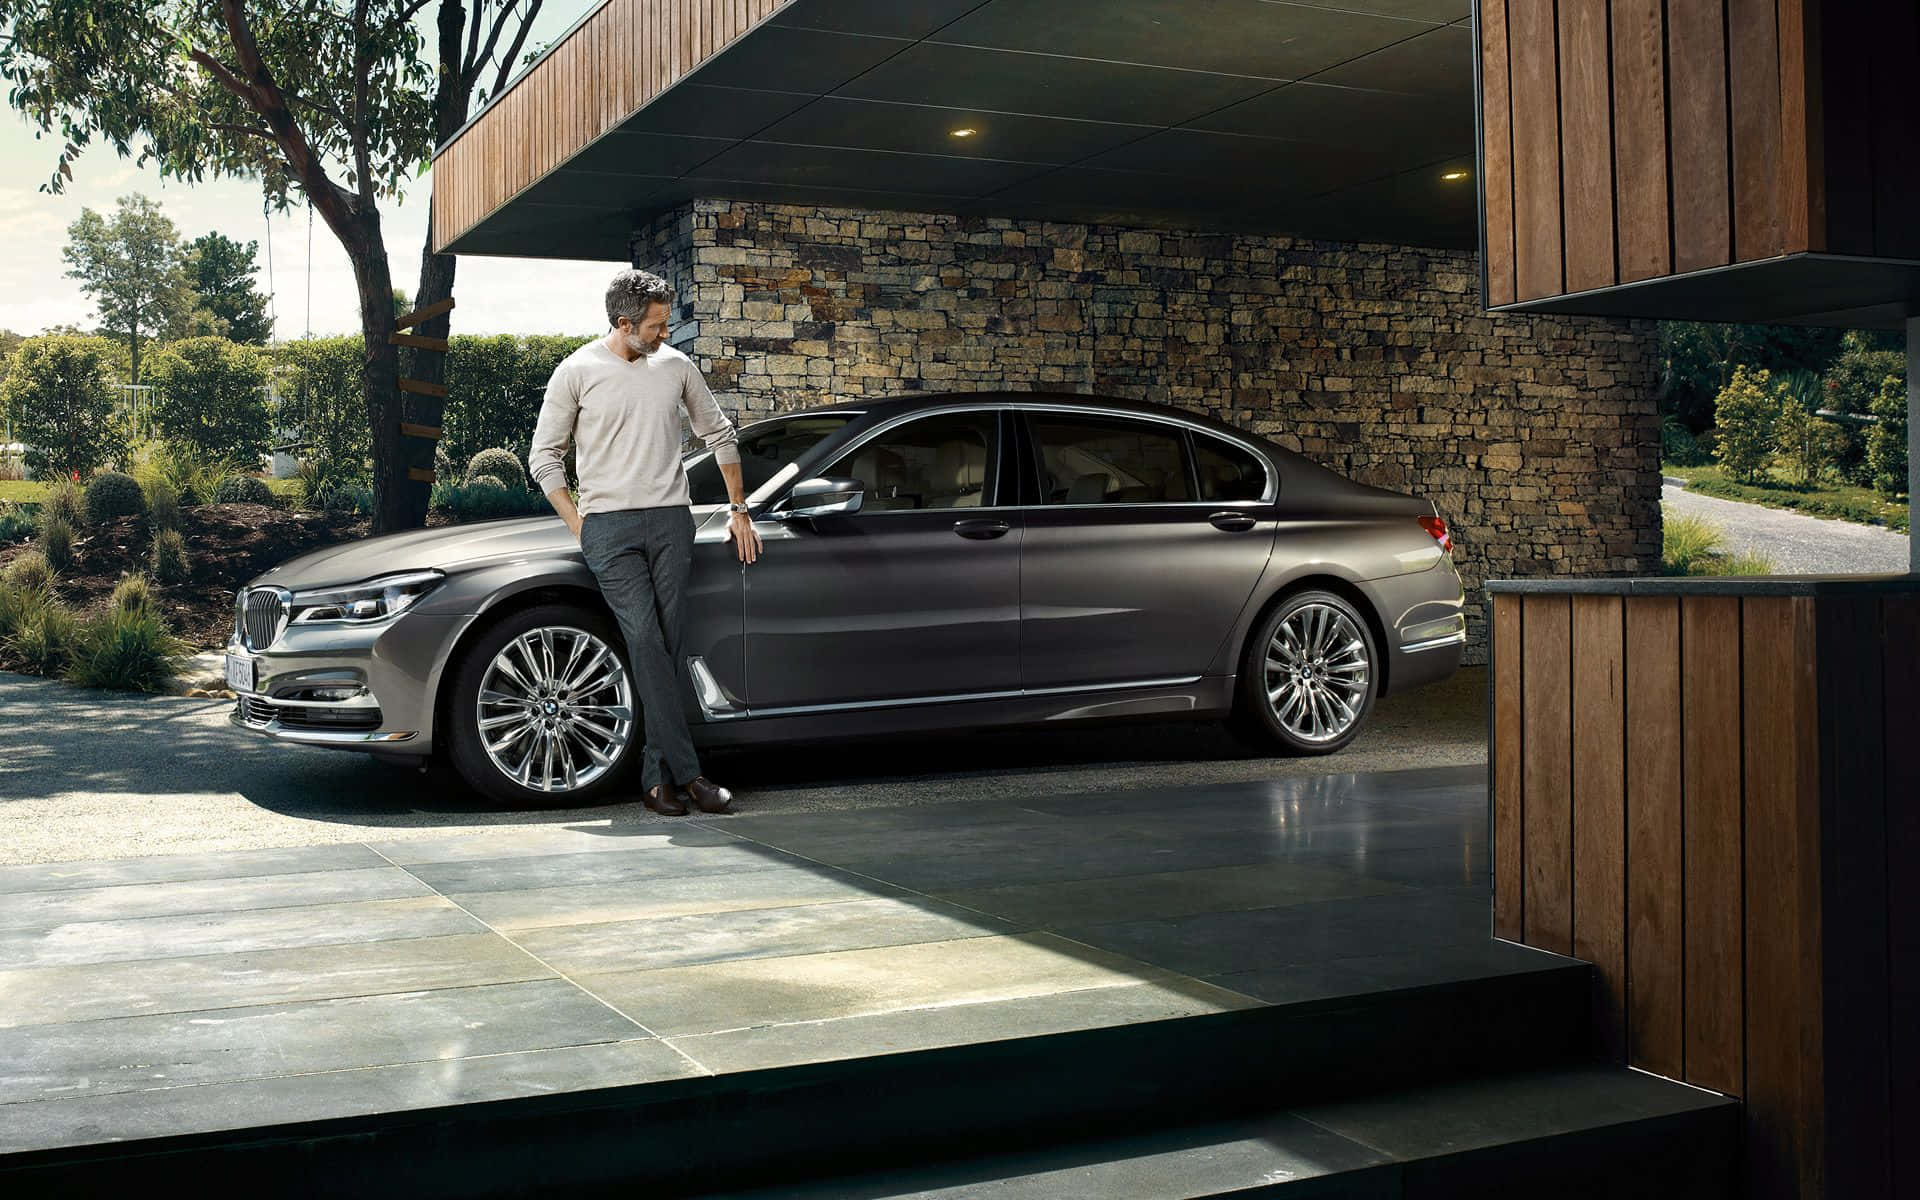 Caption: Sleek and Stylish BMW 7 Series in Motion Wallpaper